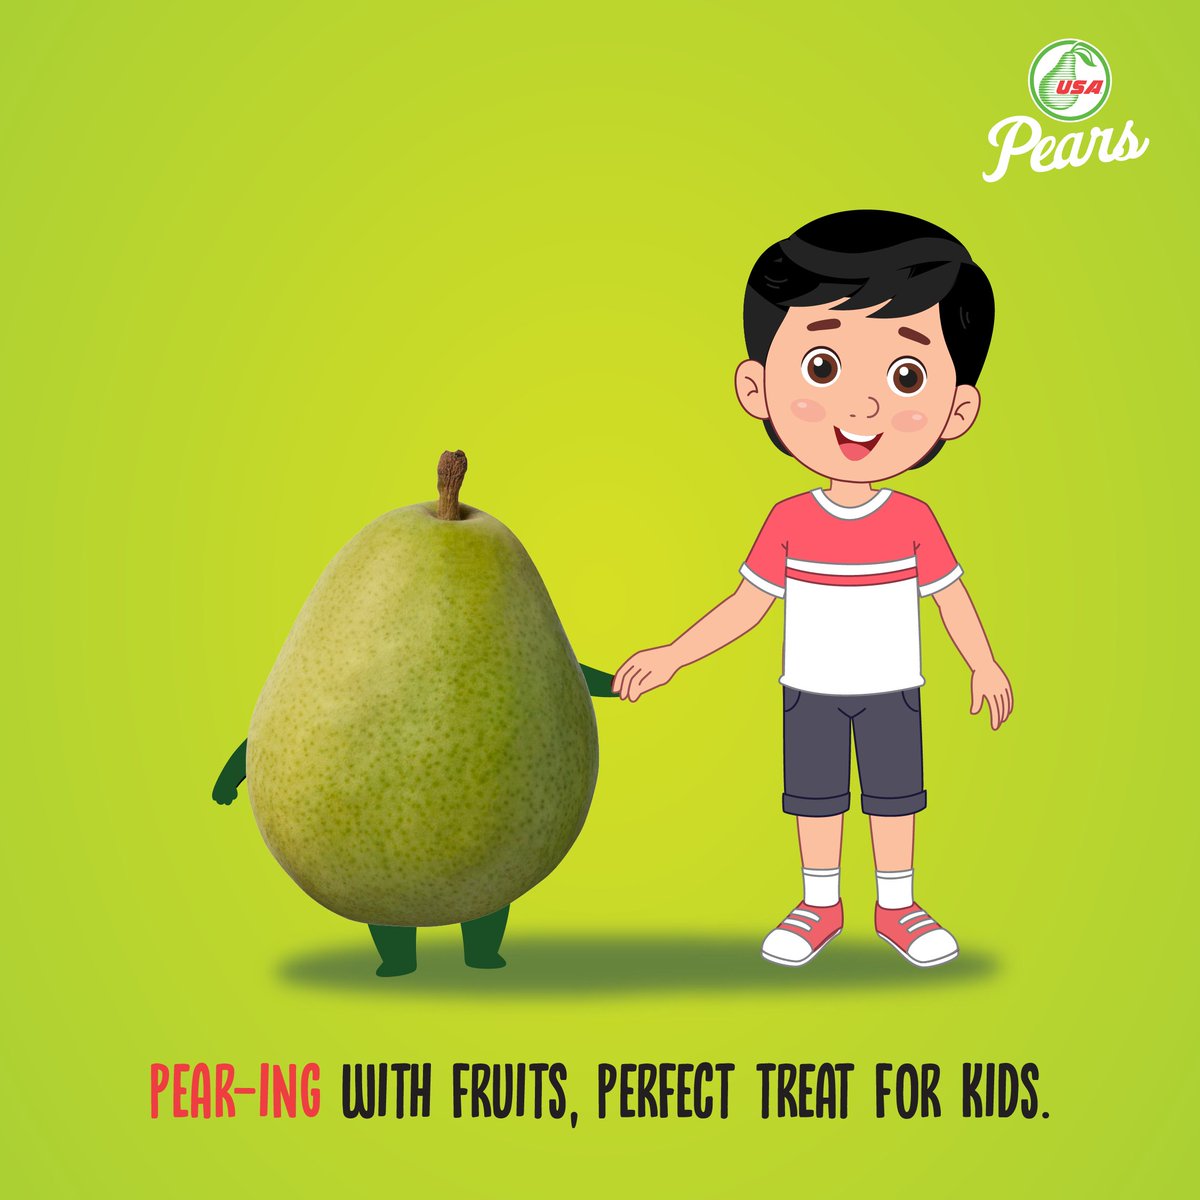 USA Pears are the pearfect snack for your child.

usapears.org/pear-nutrition/

#USAPears #USAPearIndia #Pears #Fruit #Nutrition #USAPears #PearfectSnacks